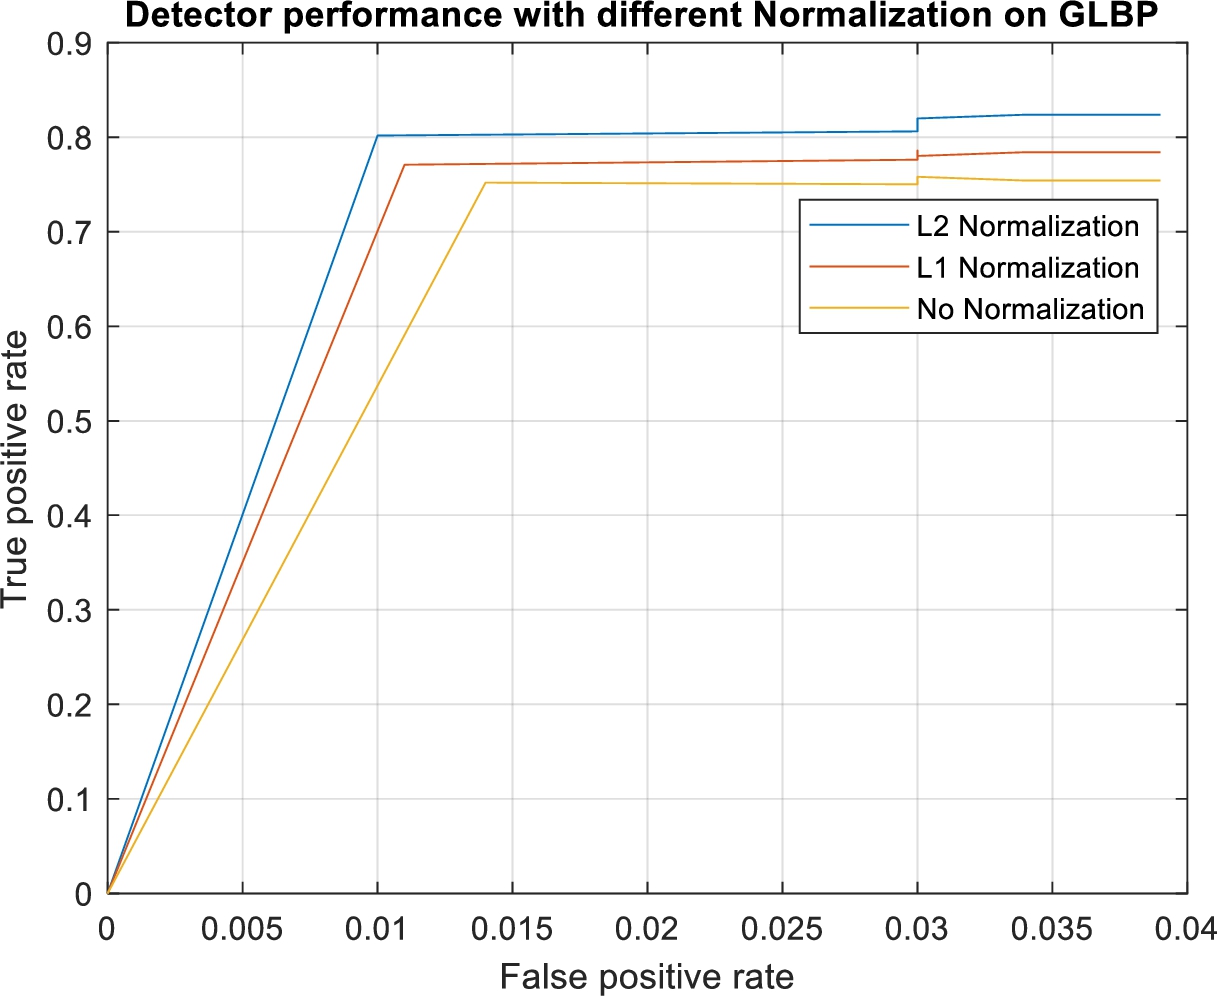 Detector performance of GLBP with different normalization.